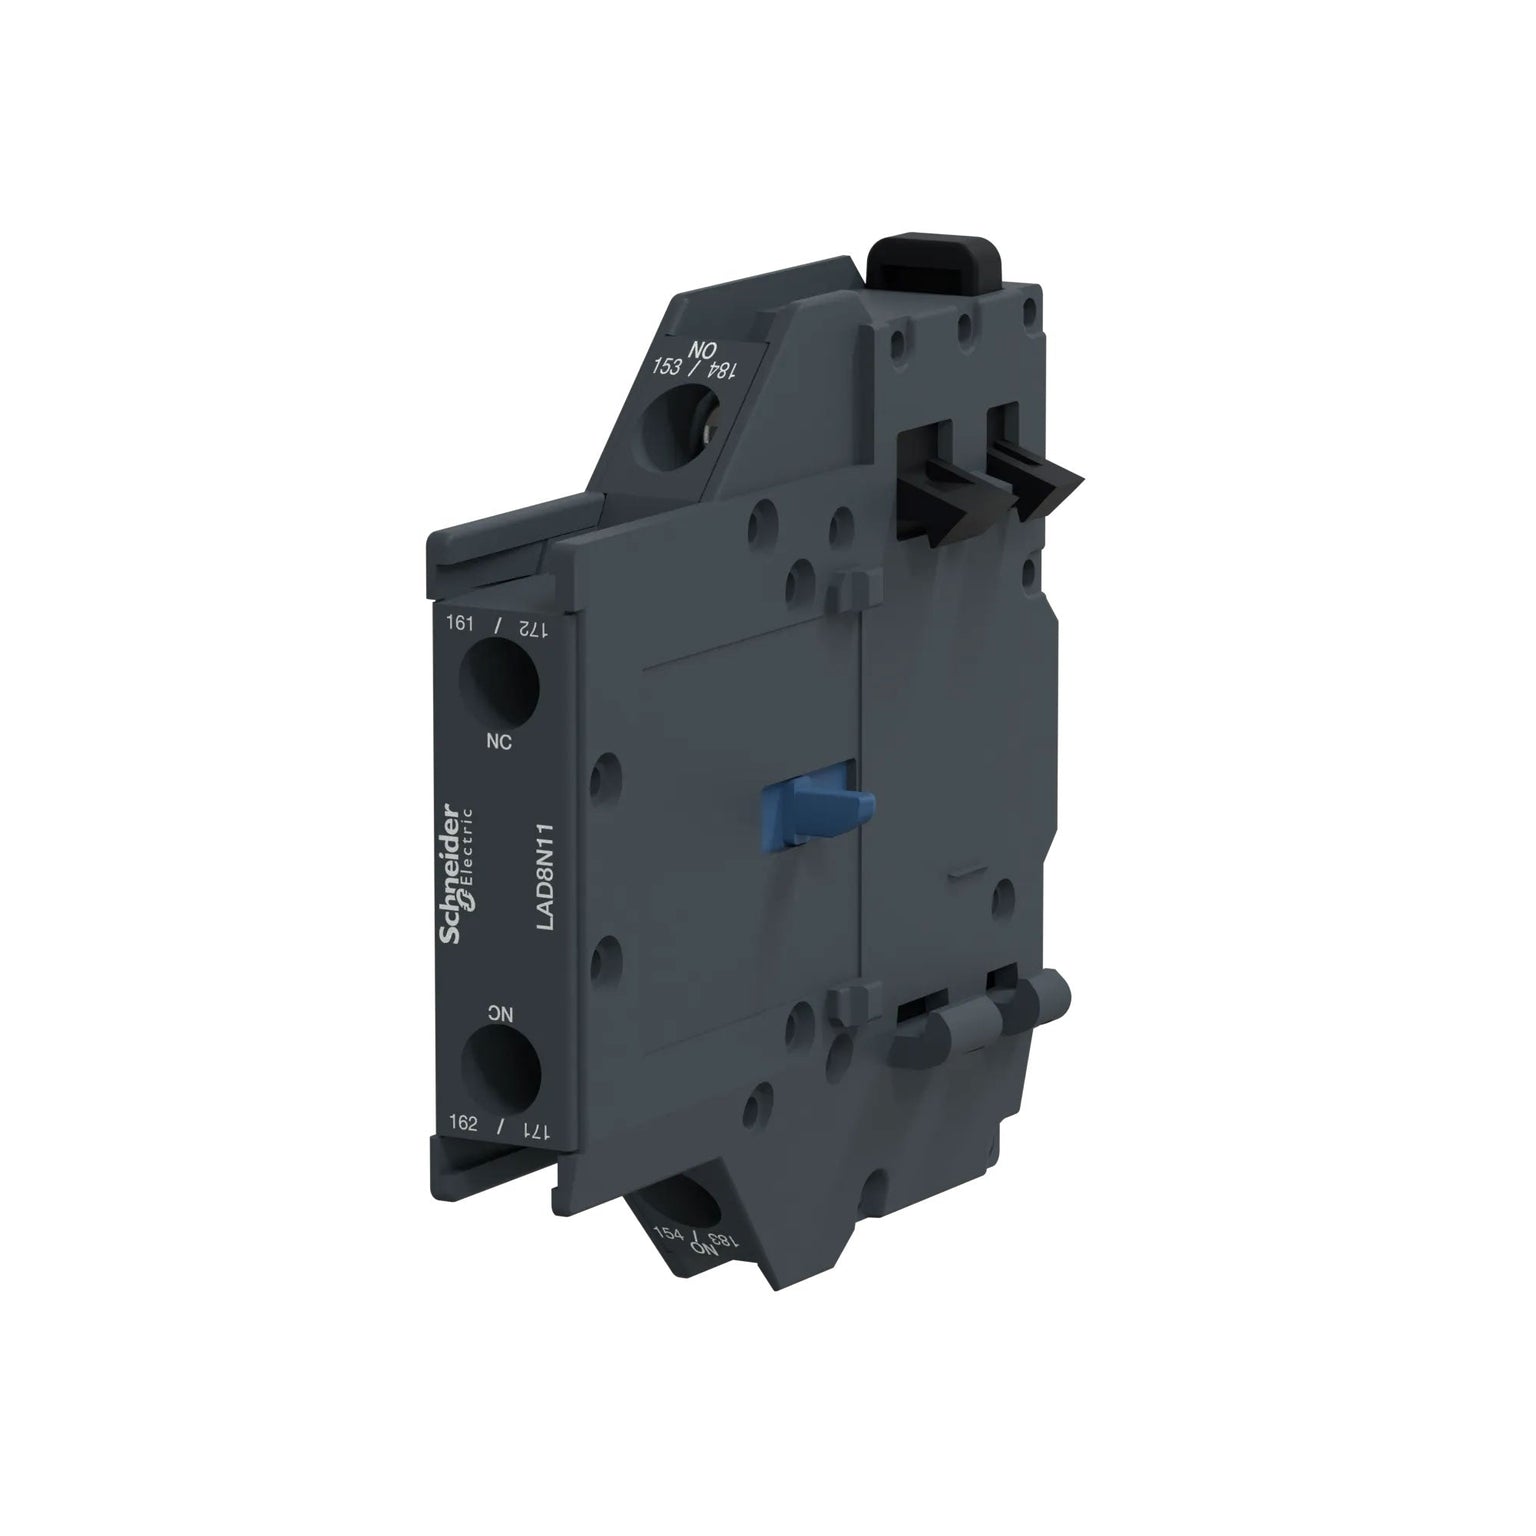 LAD8N11 - Square D - Auxiliary Contact Block